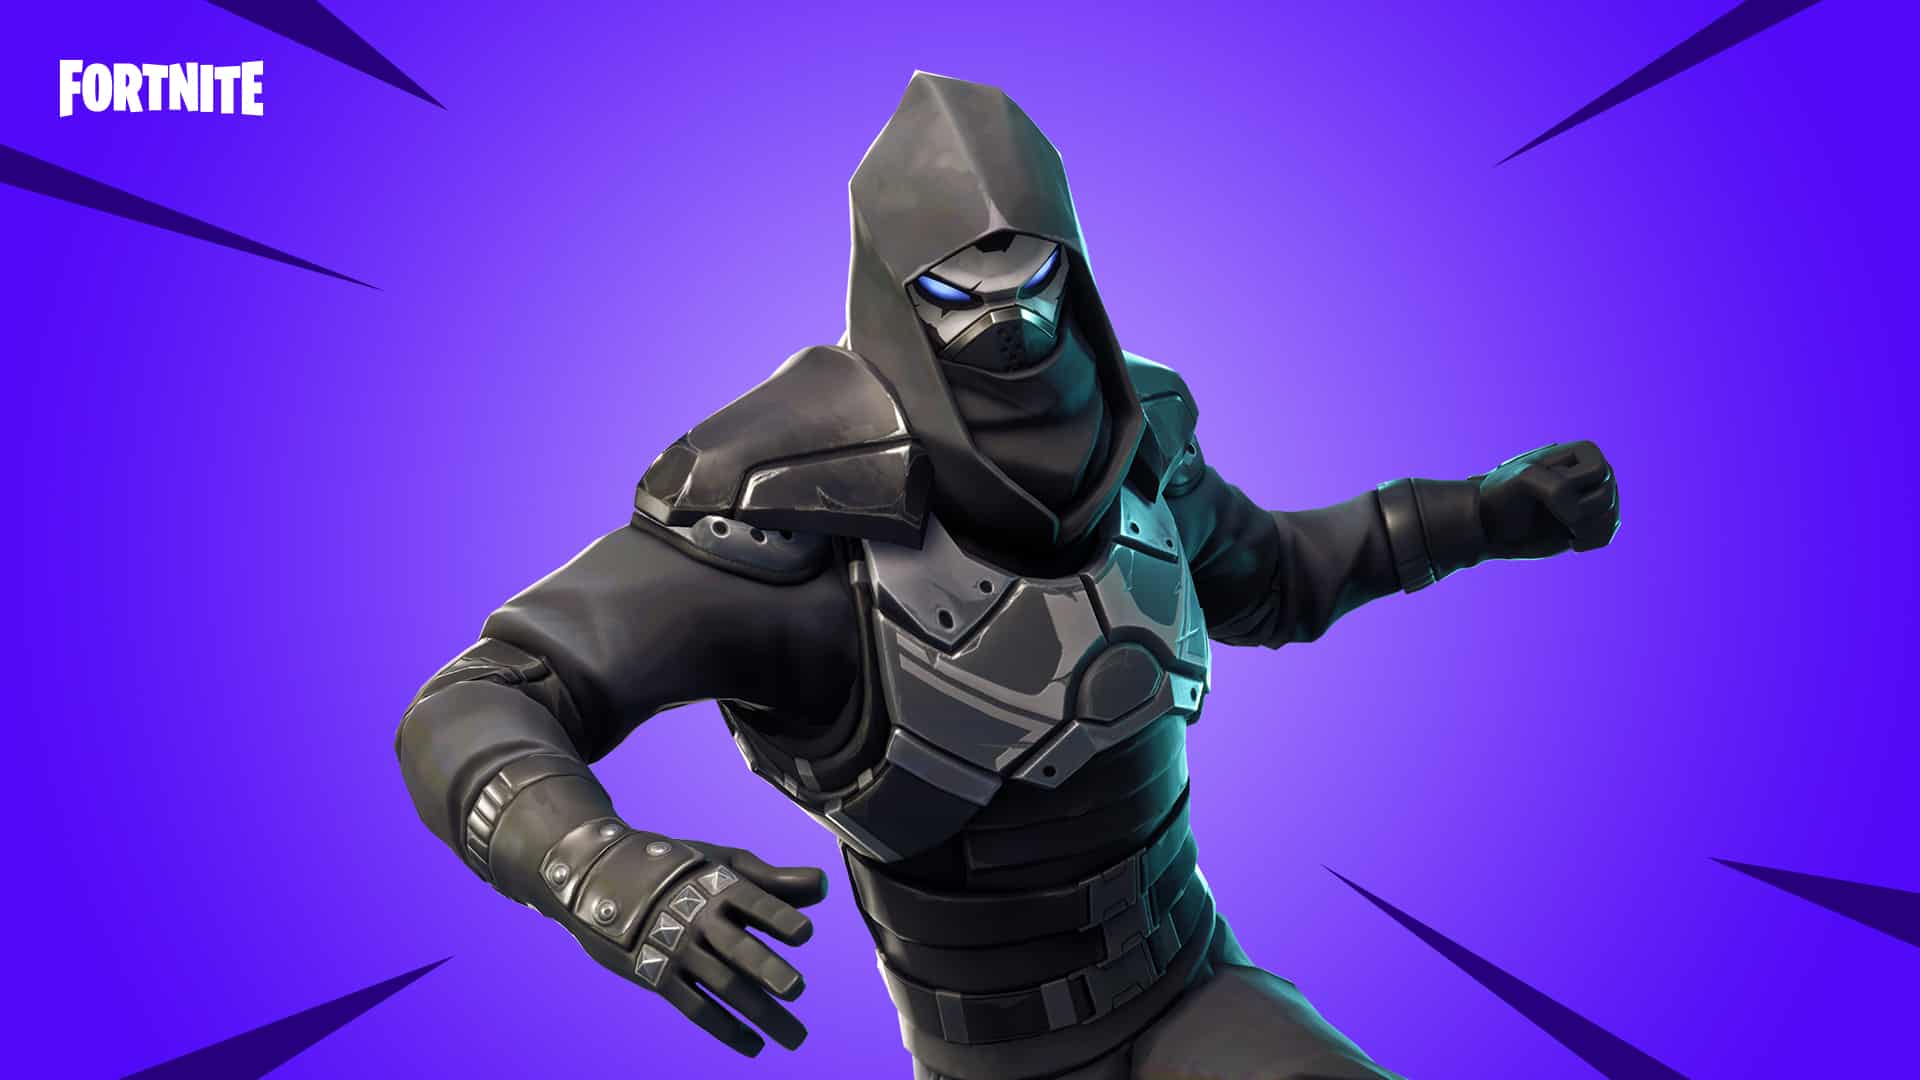 Fortnite Skin Textures: Issues Arose Over the Recurring Designs